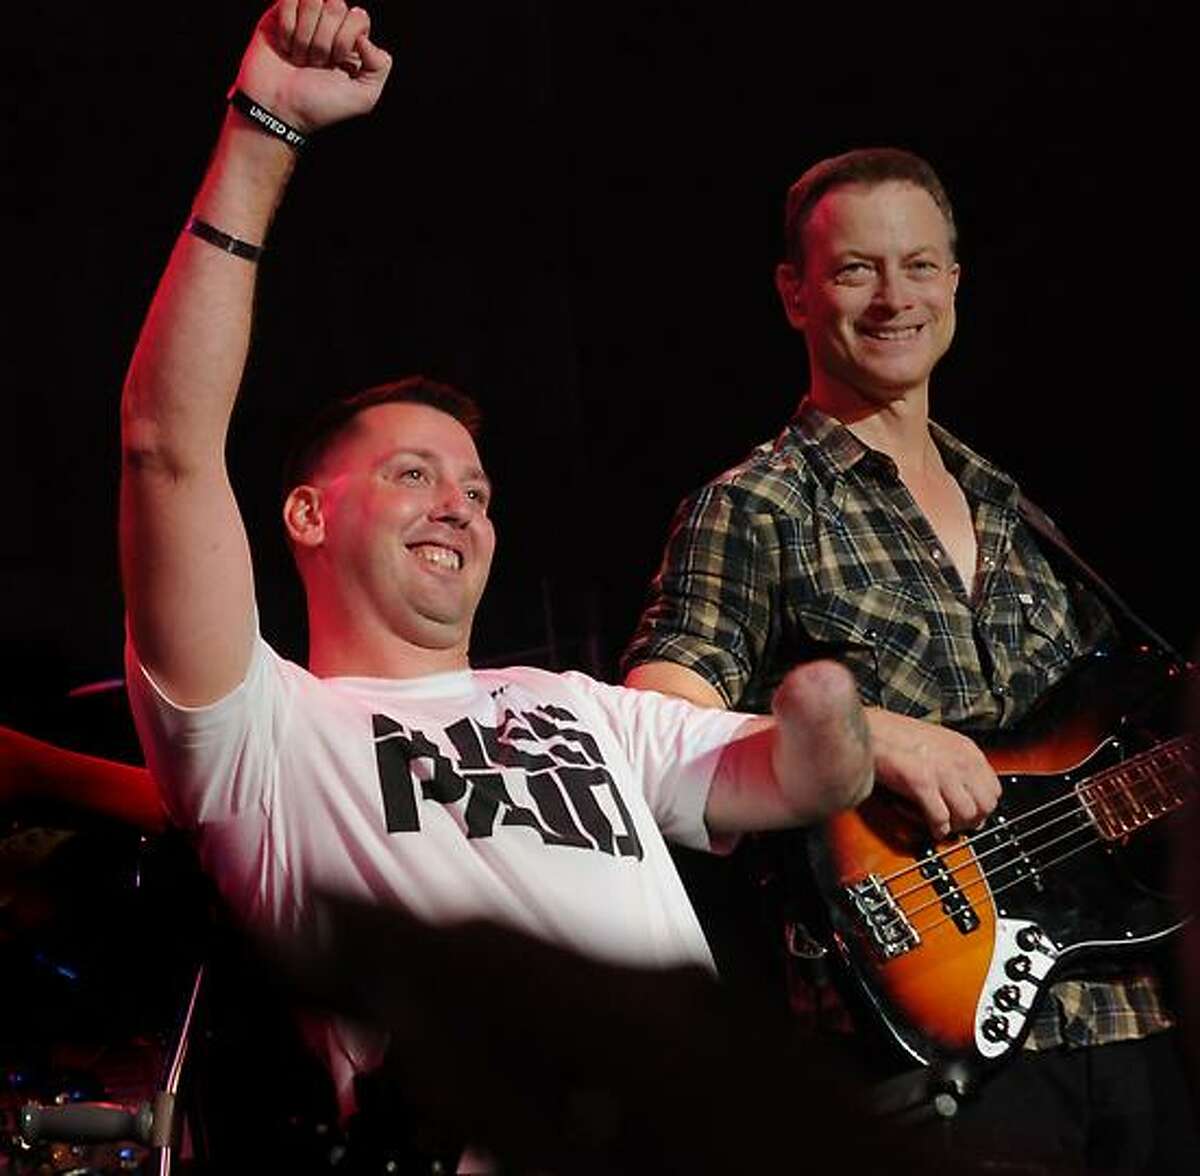 Gary Sinise, right, with veteran Adam Keys, left, at the benefit concert at State Theater in Easton, Penn. Photo by Melanie Stengel/New Haven Register